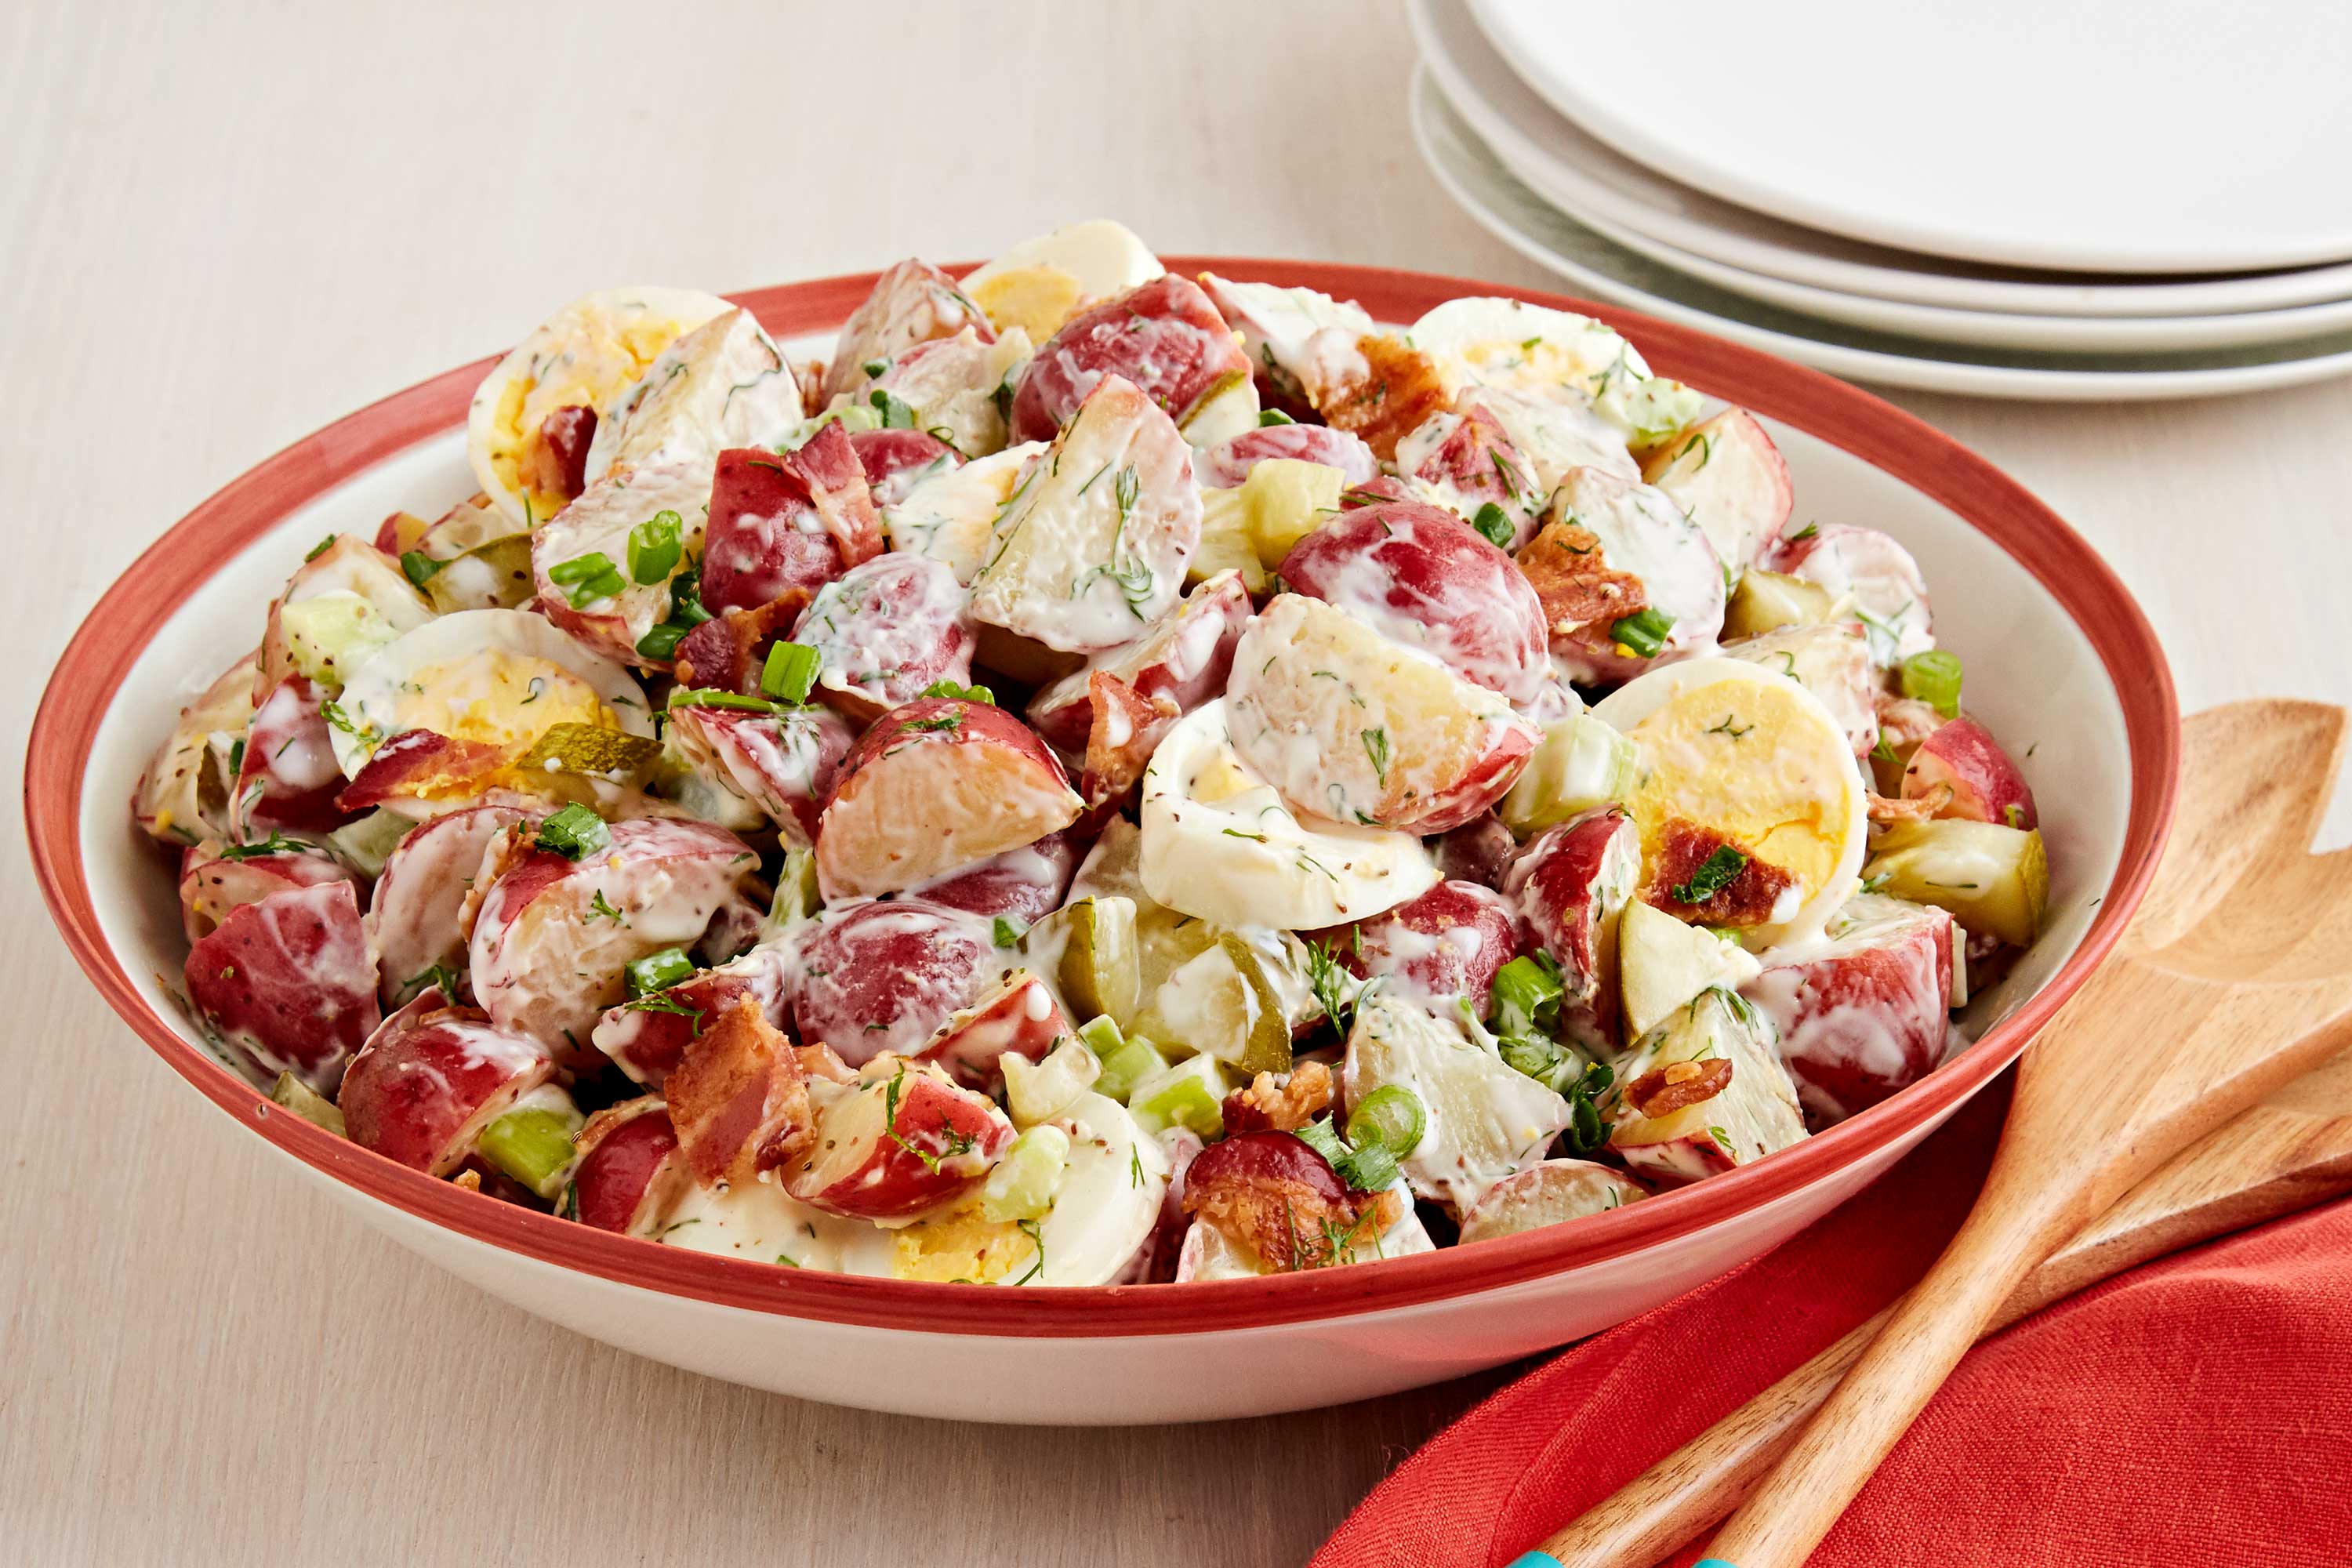 Dill Pickle Potato Salad with Bacon